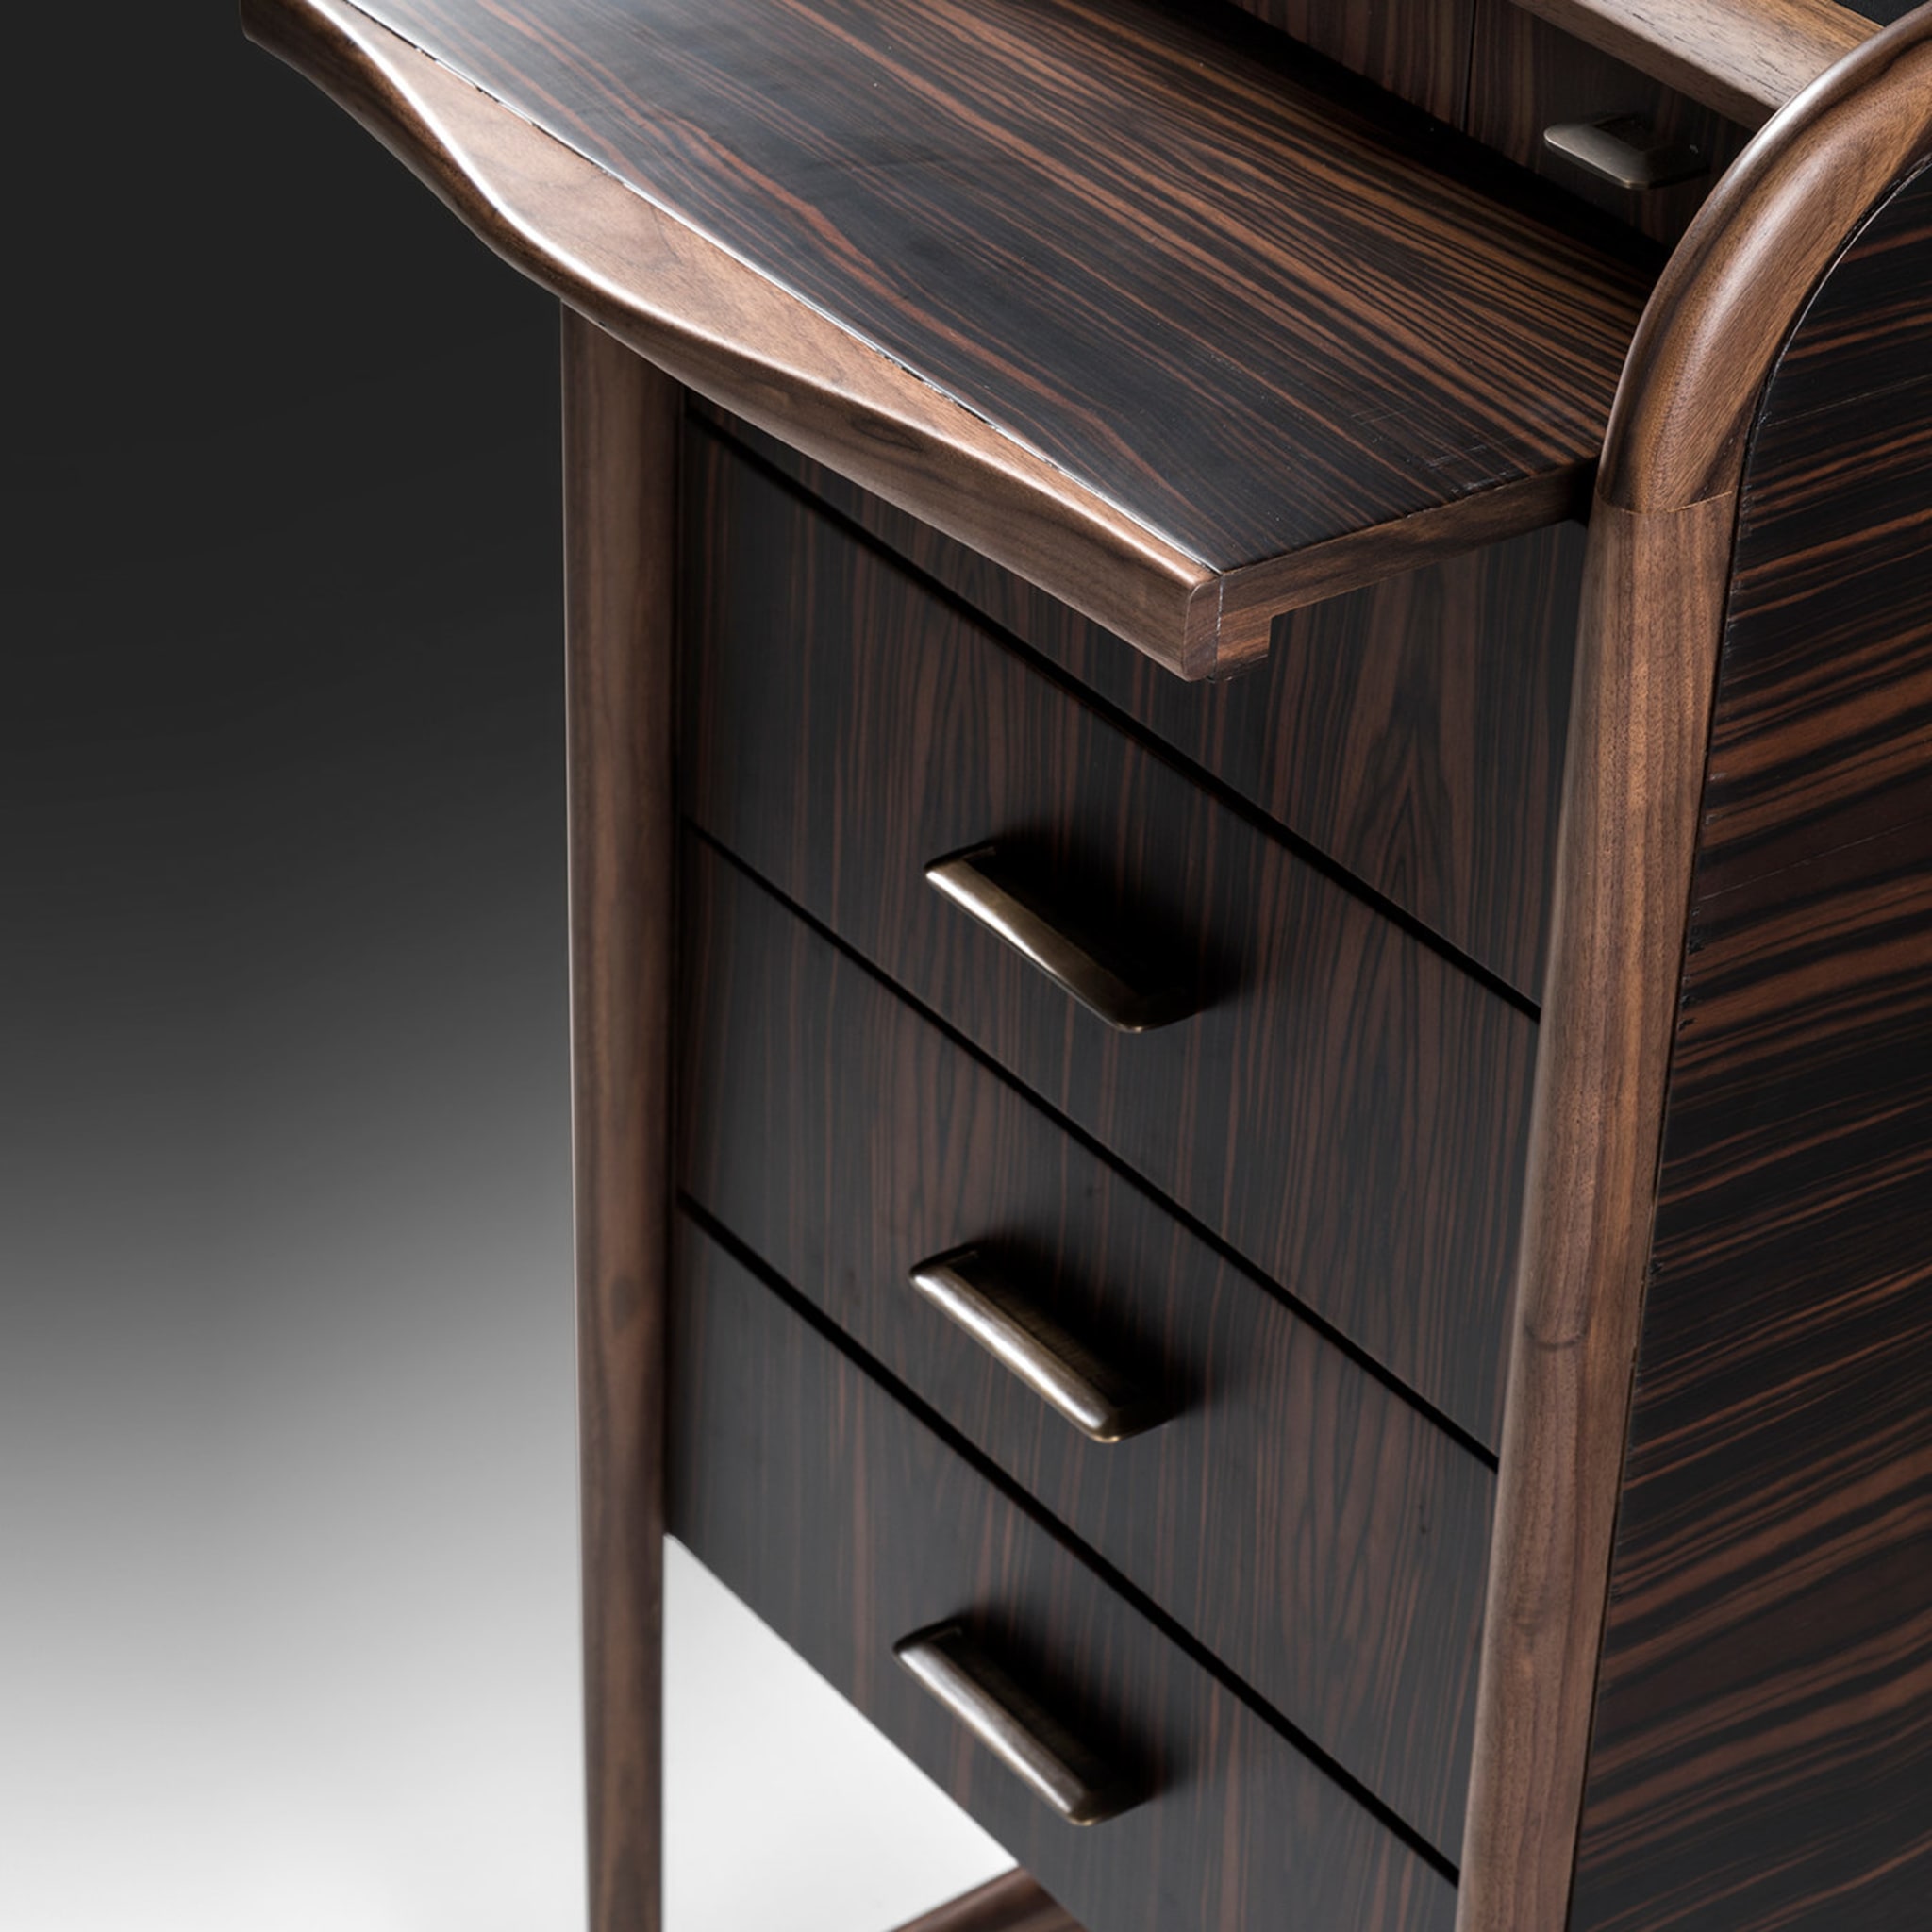 Pitagora Chest Of Drawers by Ivano Colombo - Alternative view 1